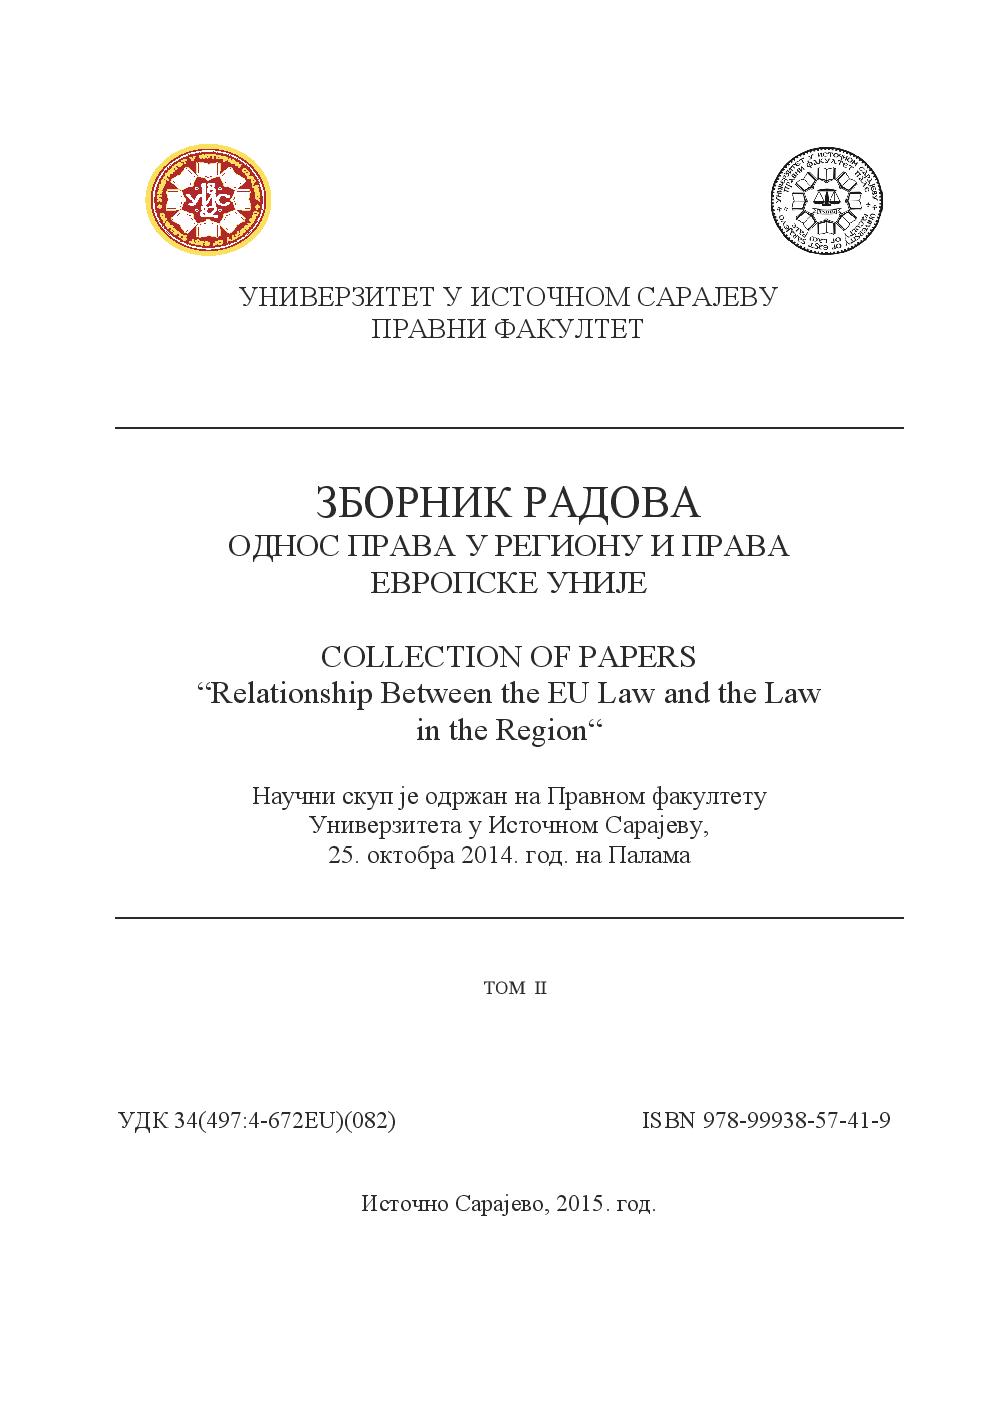 The Regulation of Ownership in the Legal System of Republic of Macedonia and the Possibilities for Harmonization With EU Las Cover Image